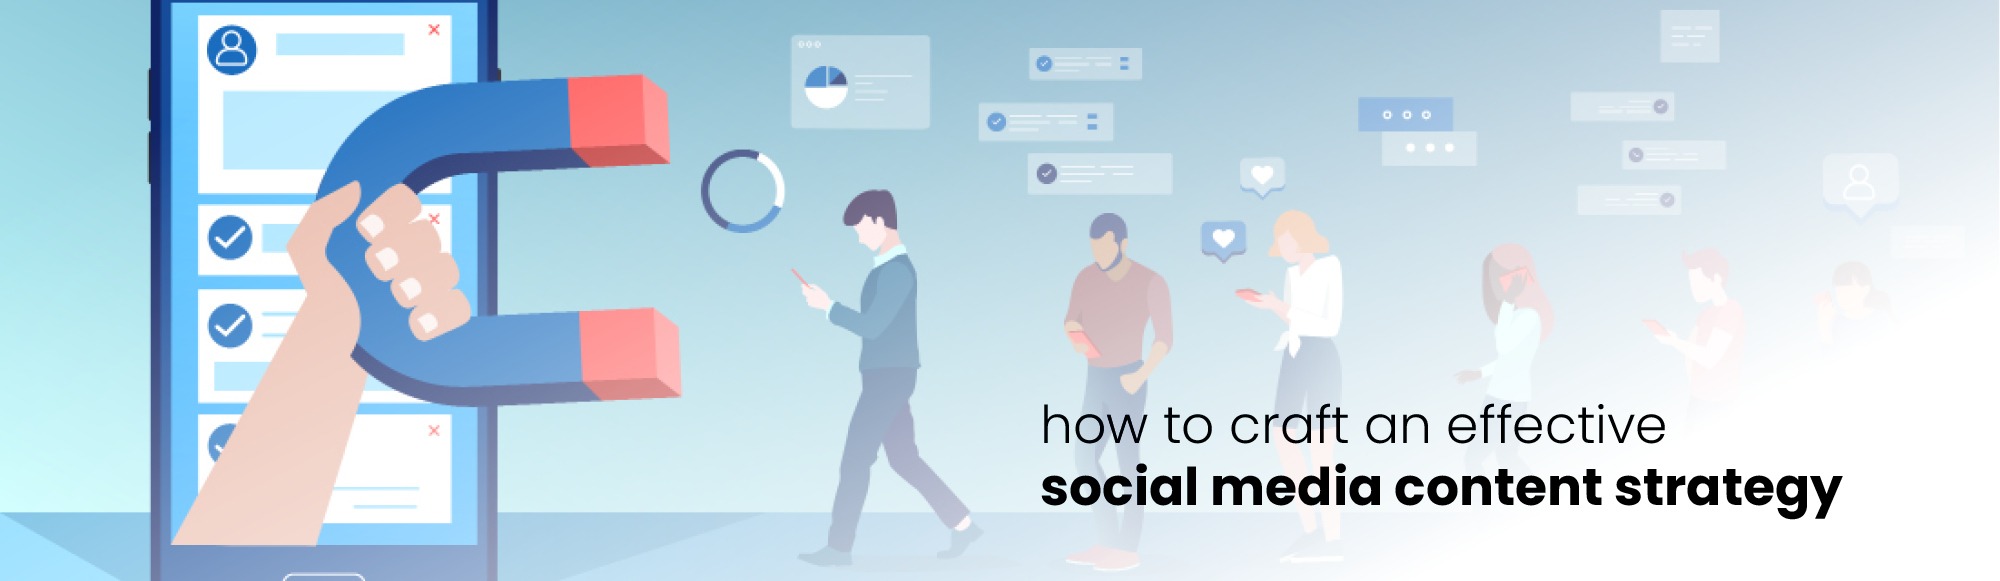 How to Craft an Effective Social Media Content Strategy